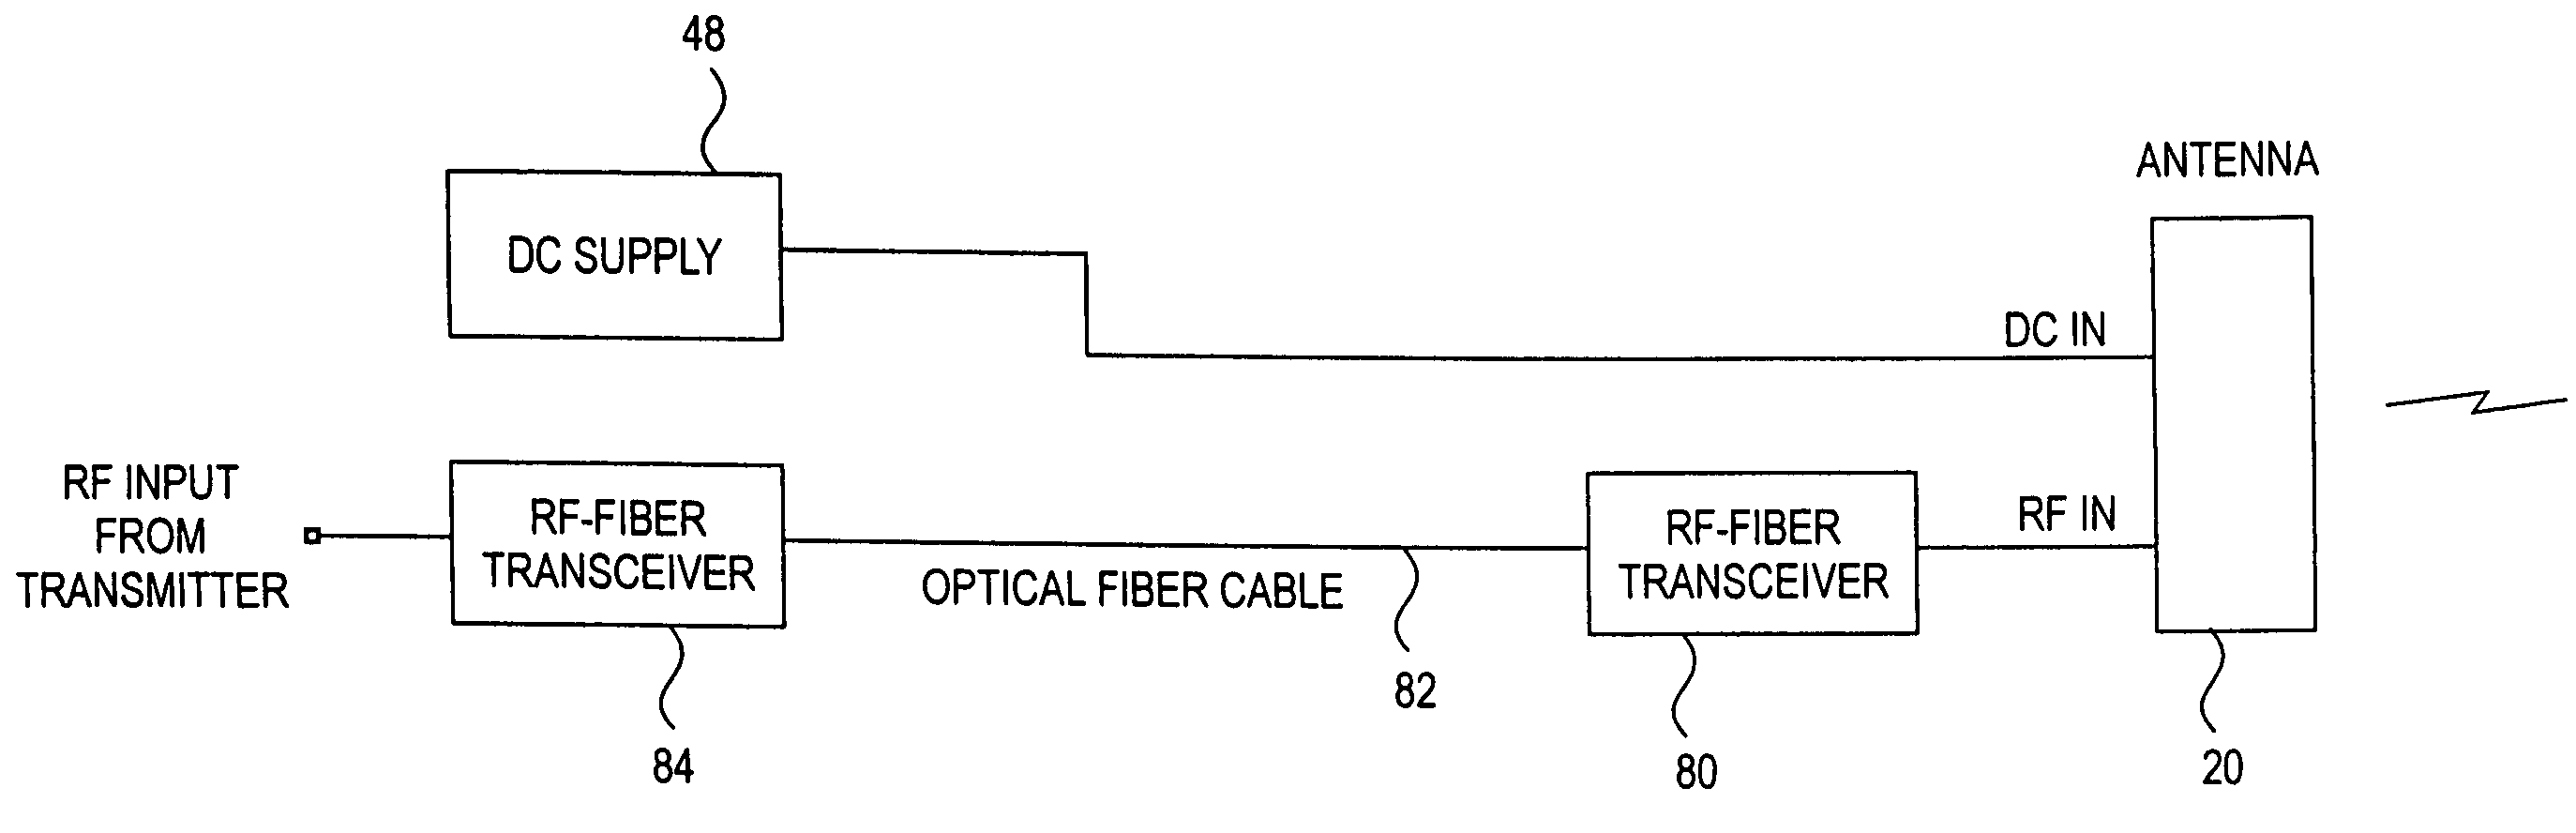 Antenna structure and installation